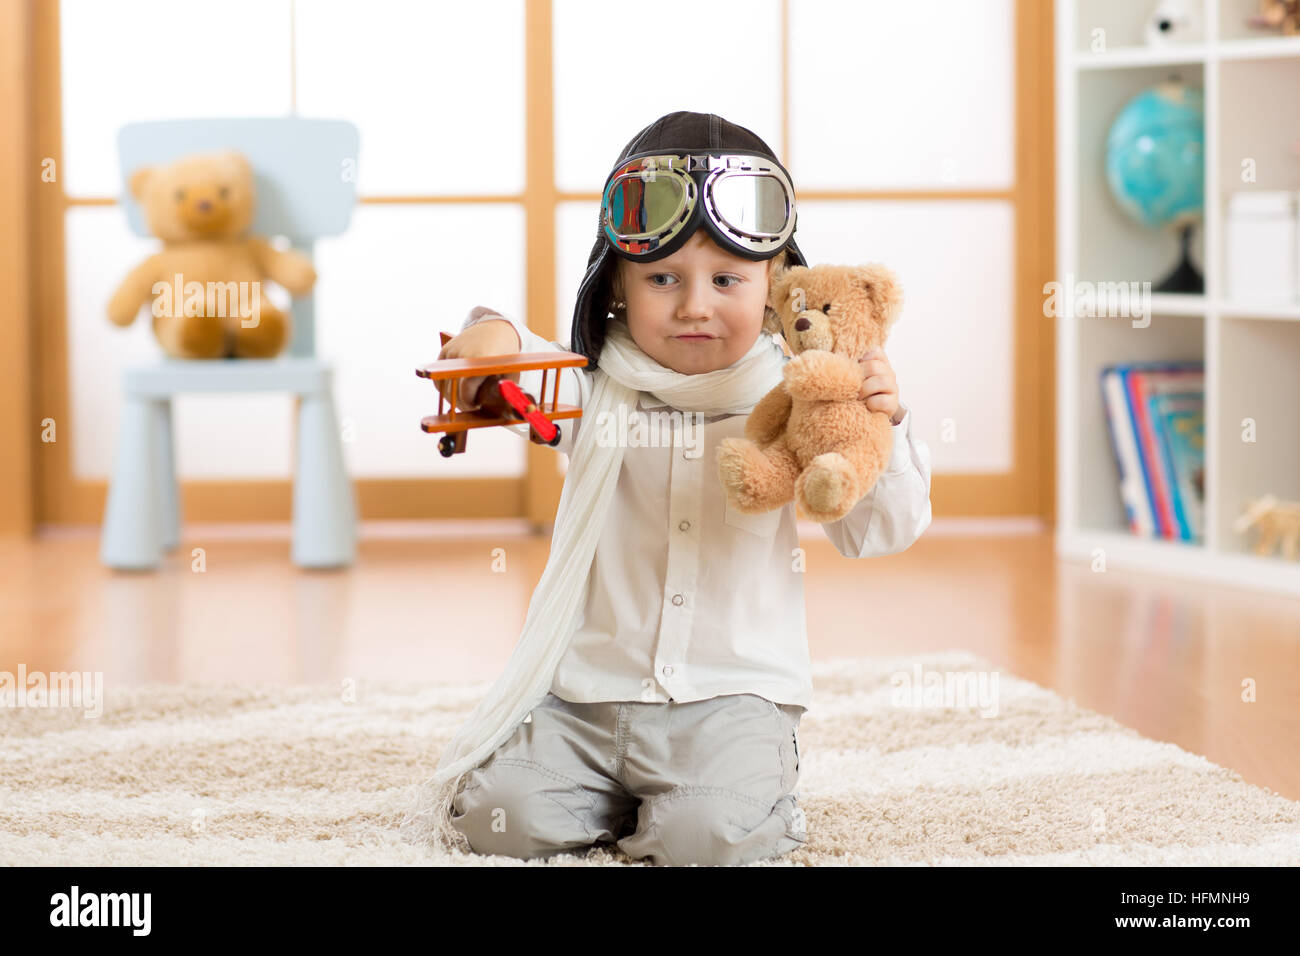 happy child toddler playing with toy airplane and dreaming of becoming a pilot Stock Photo